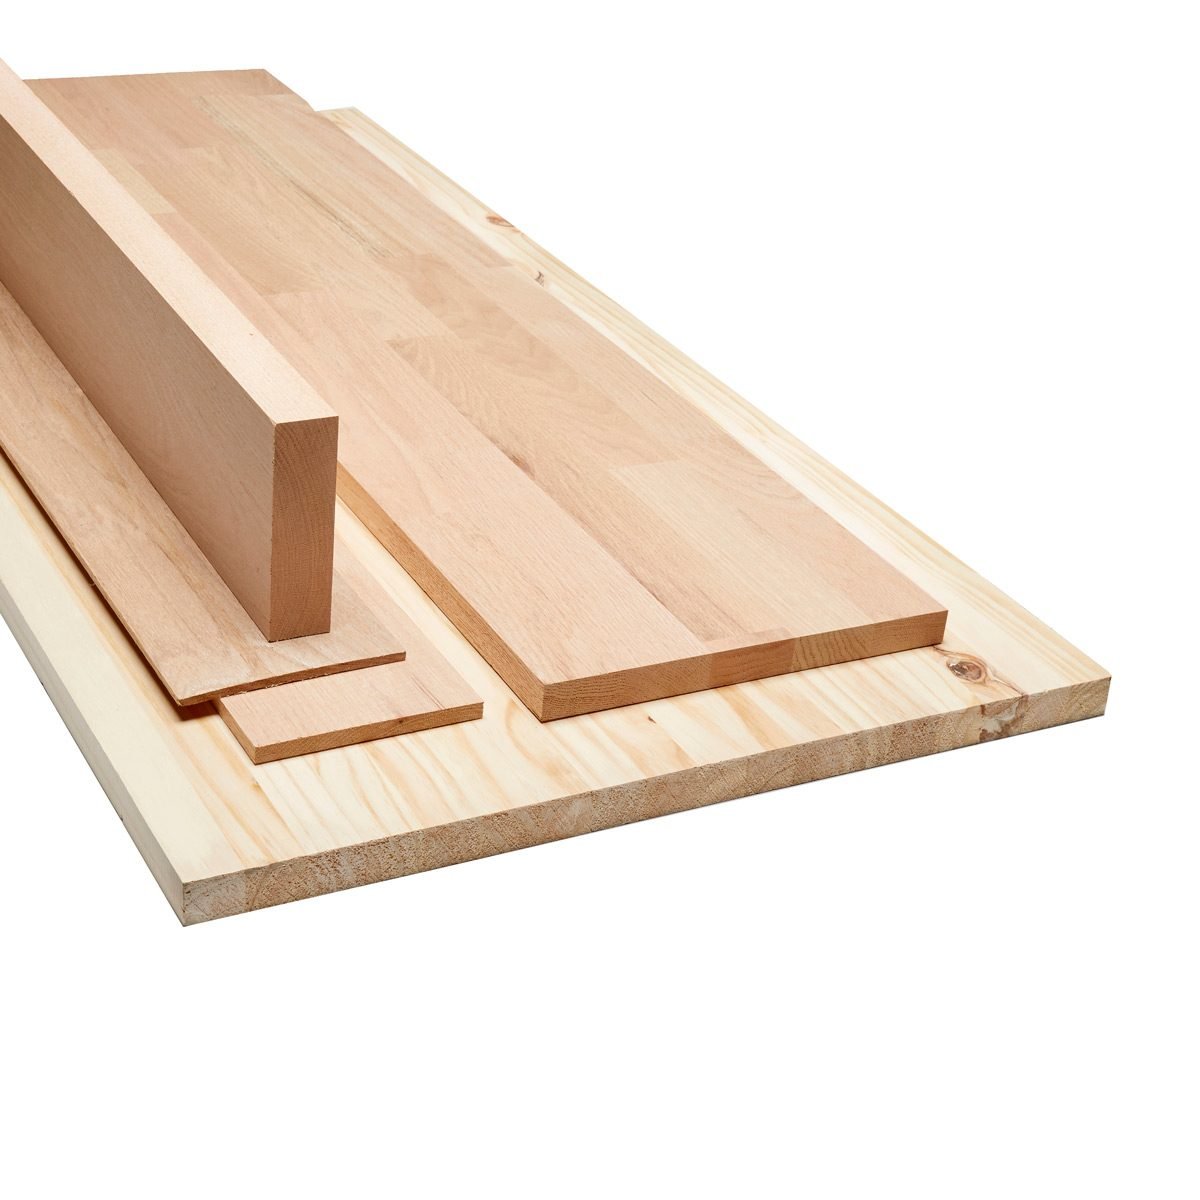 How to Find the Best Home Center Lumber for Your DIY Projects